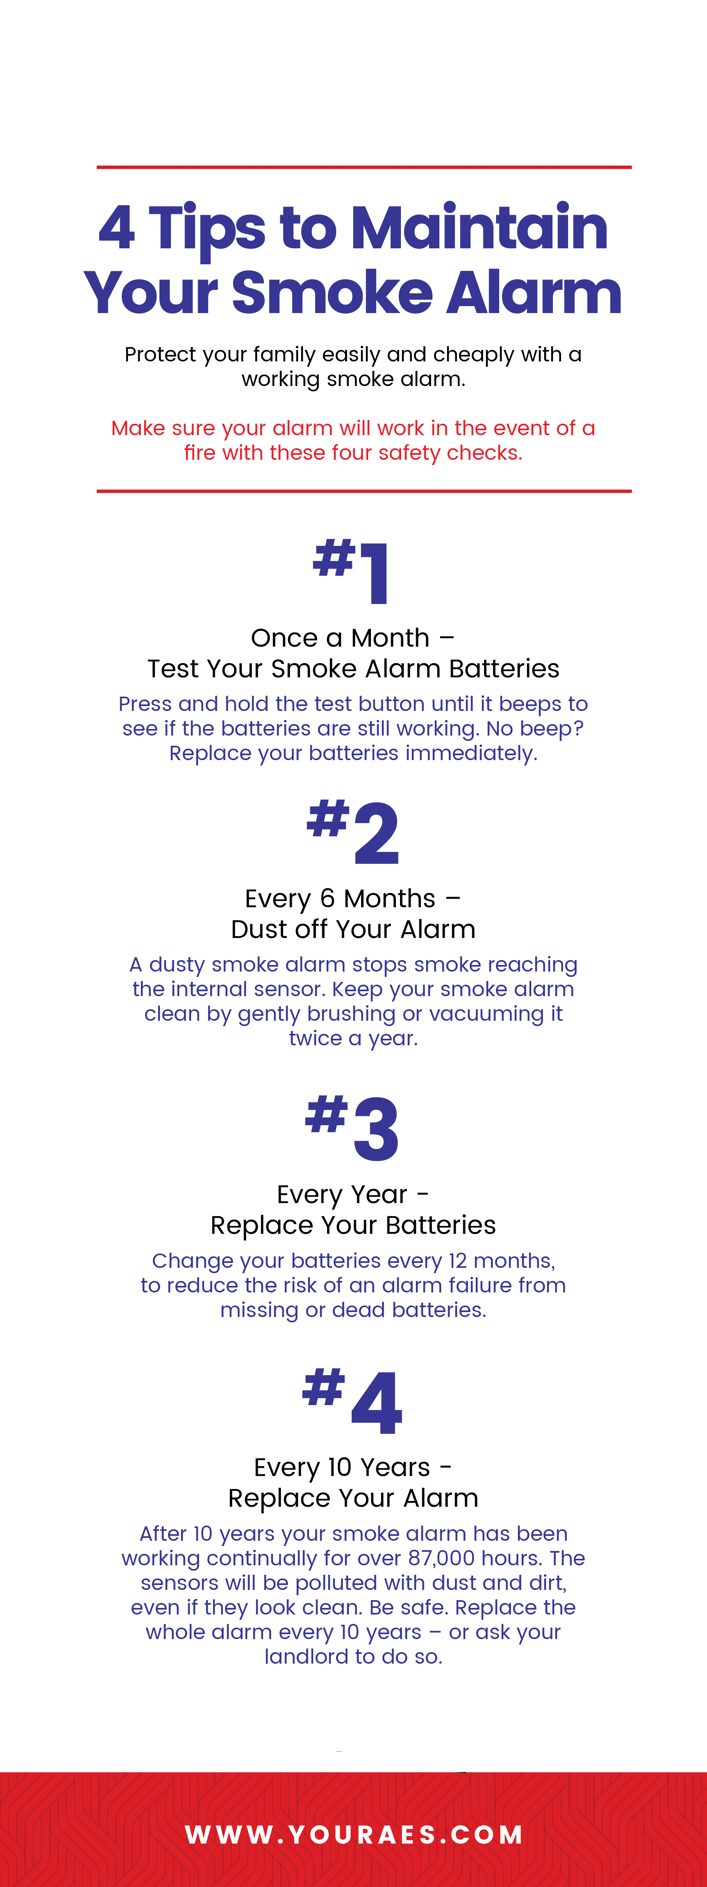 Infographic showing 4 safety tips to maintaining your smoke slarm